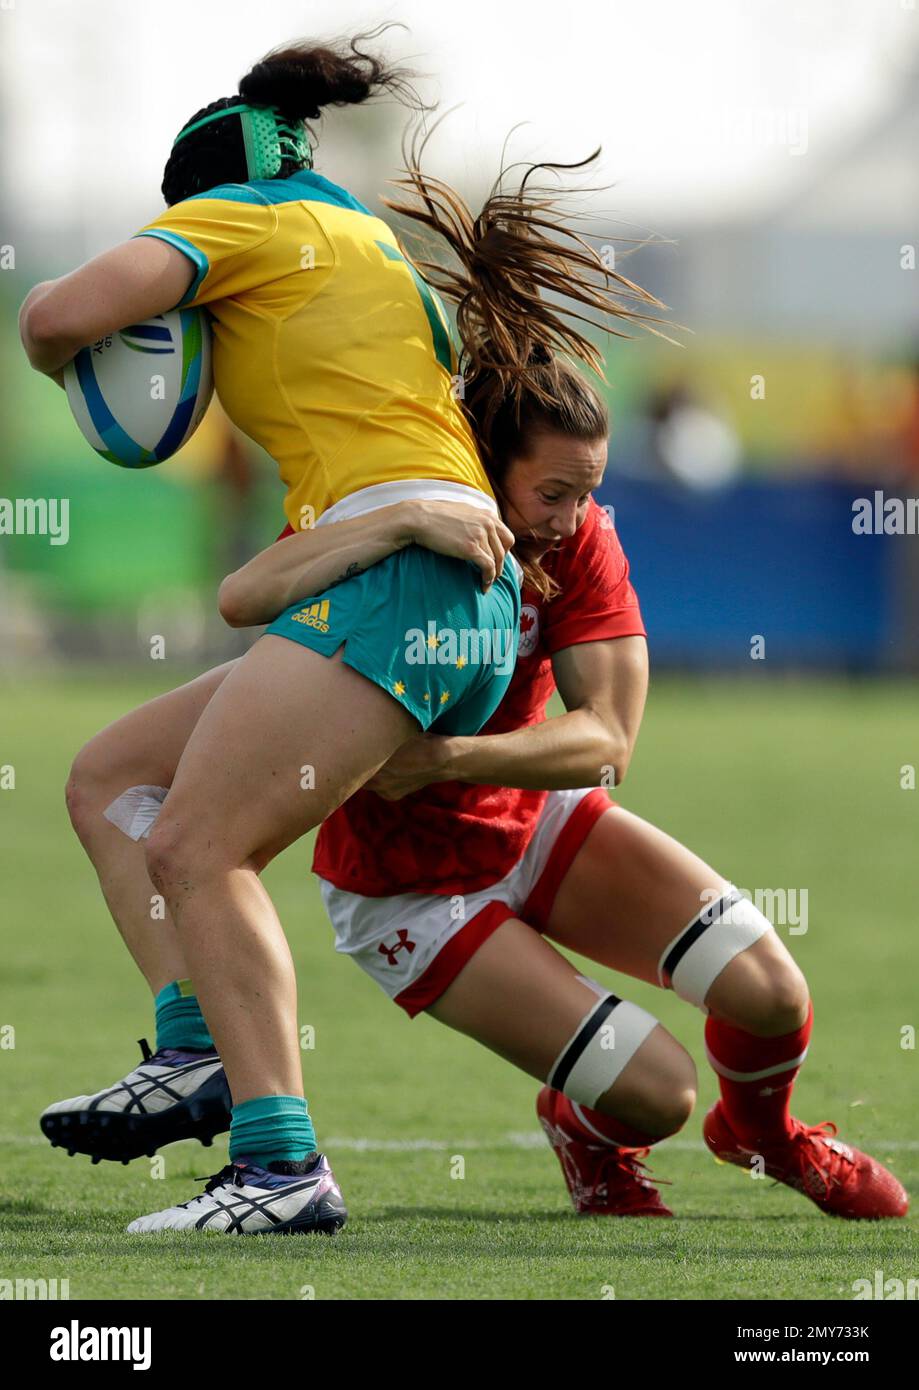 Australias Emilee Cherry, left, is tackled by Canadas Natasha Watcham-Roy, during the womens rugby sevens semi final match at the Summer Olympics in Rio de Janeiro, Brazil, Monday, Aug